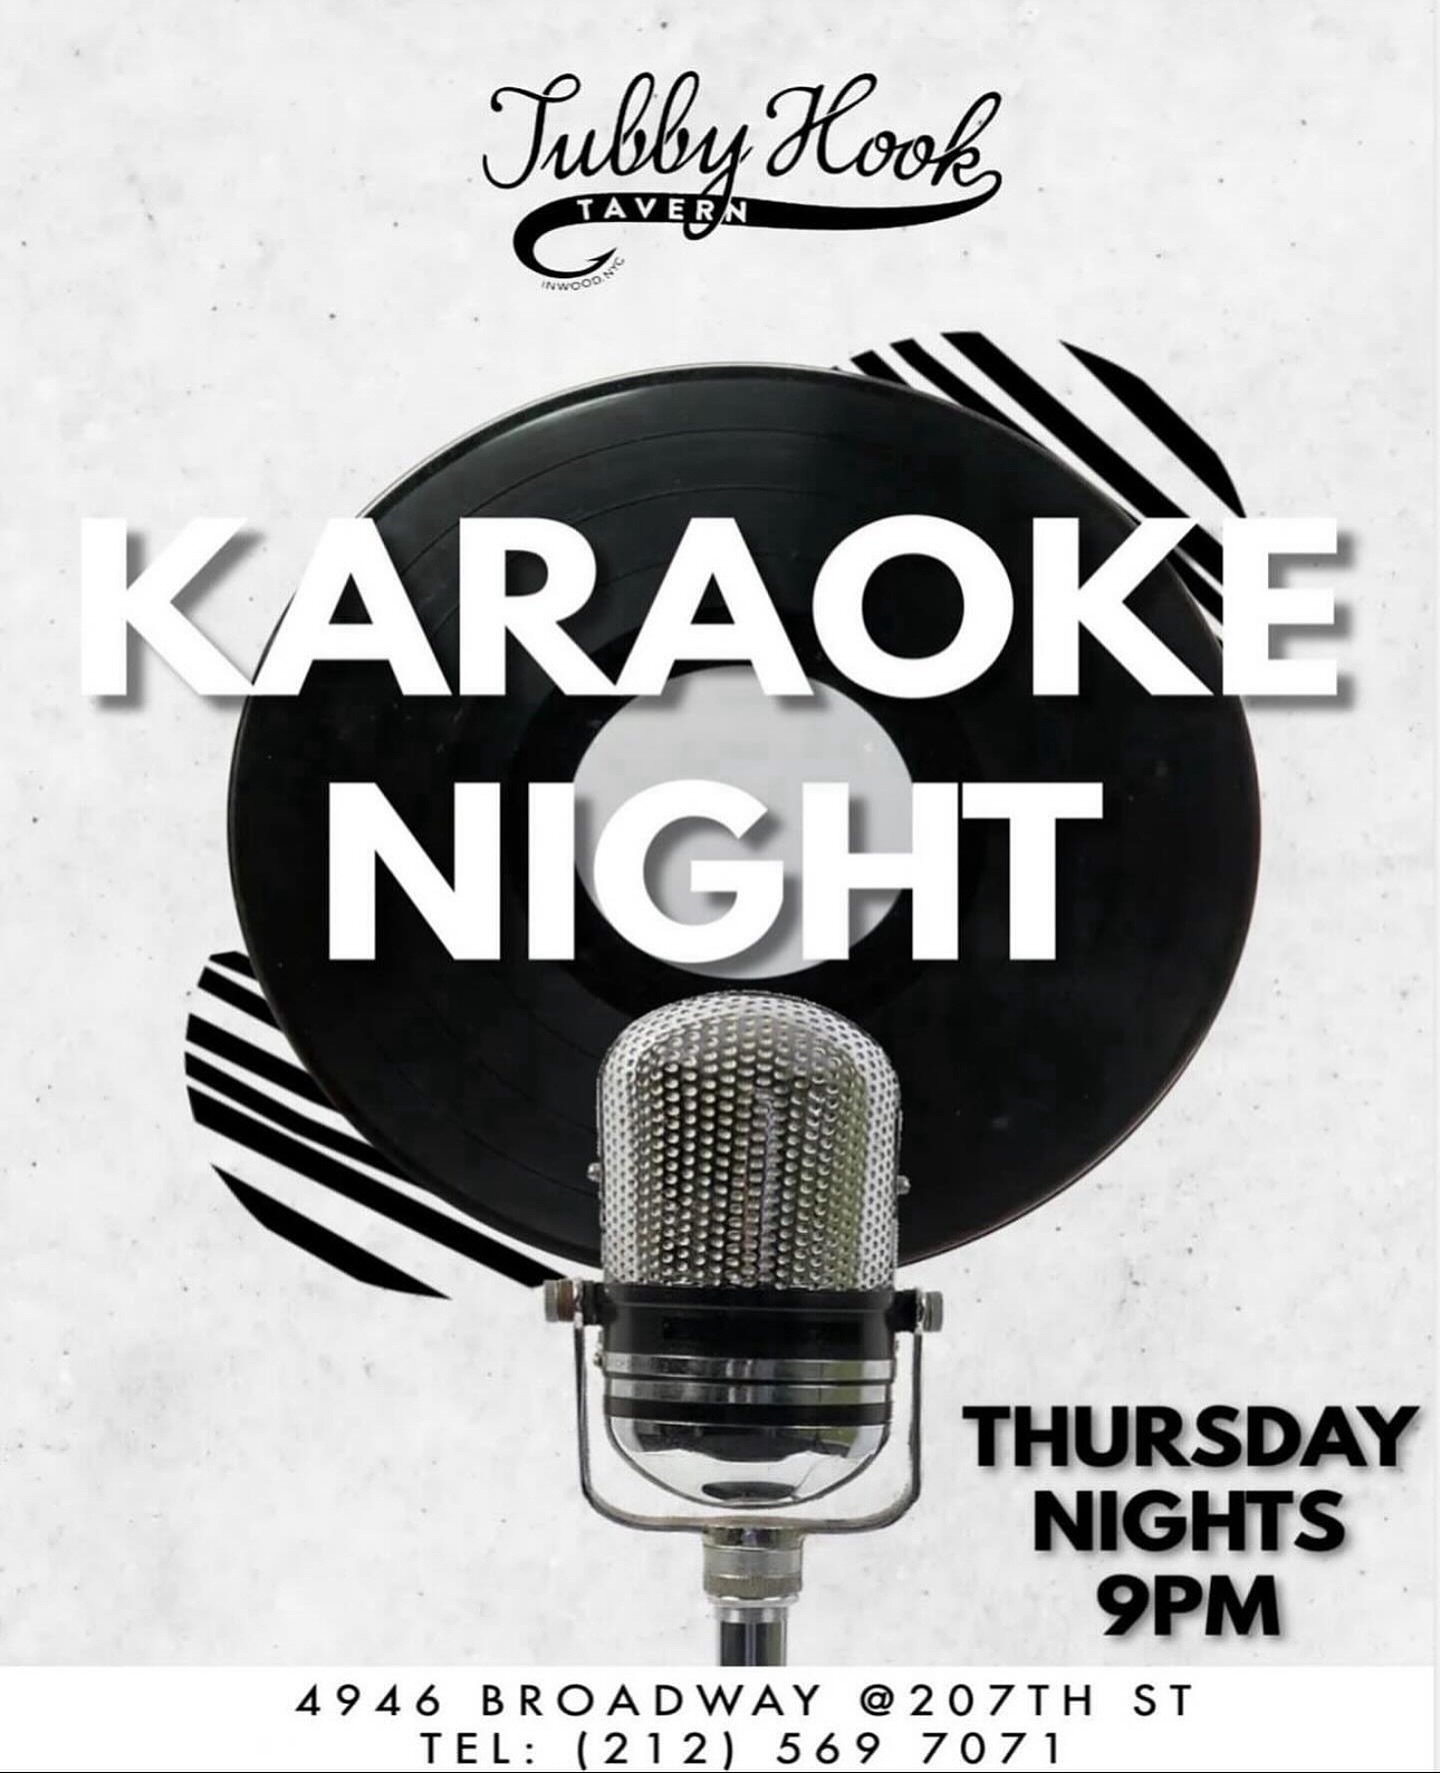 It&rsquo;s karaoke Thursday. Starts 9pm 🎤

📍4946 Broadway @207th St, NY, 10034

#inwood #inwoodnyc #uptown #uptownnyc #karaoke #karaokenight #karaokeparty #sing #singers #broadway #letsdrink #letseat #party #friends #fun